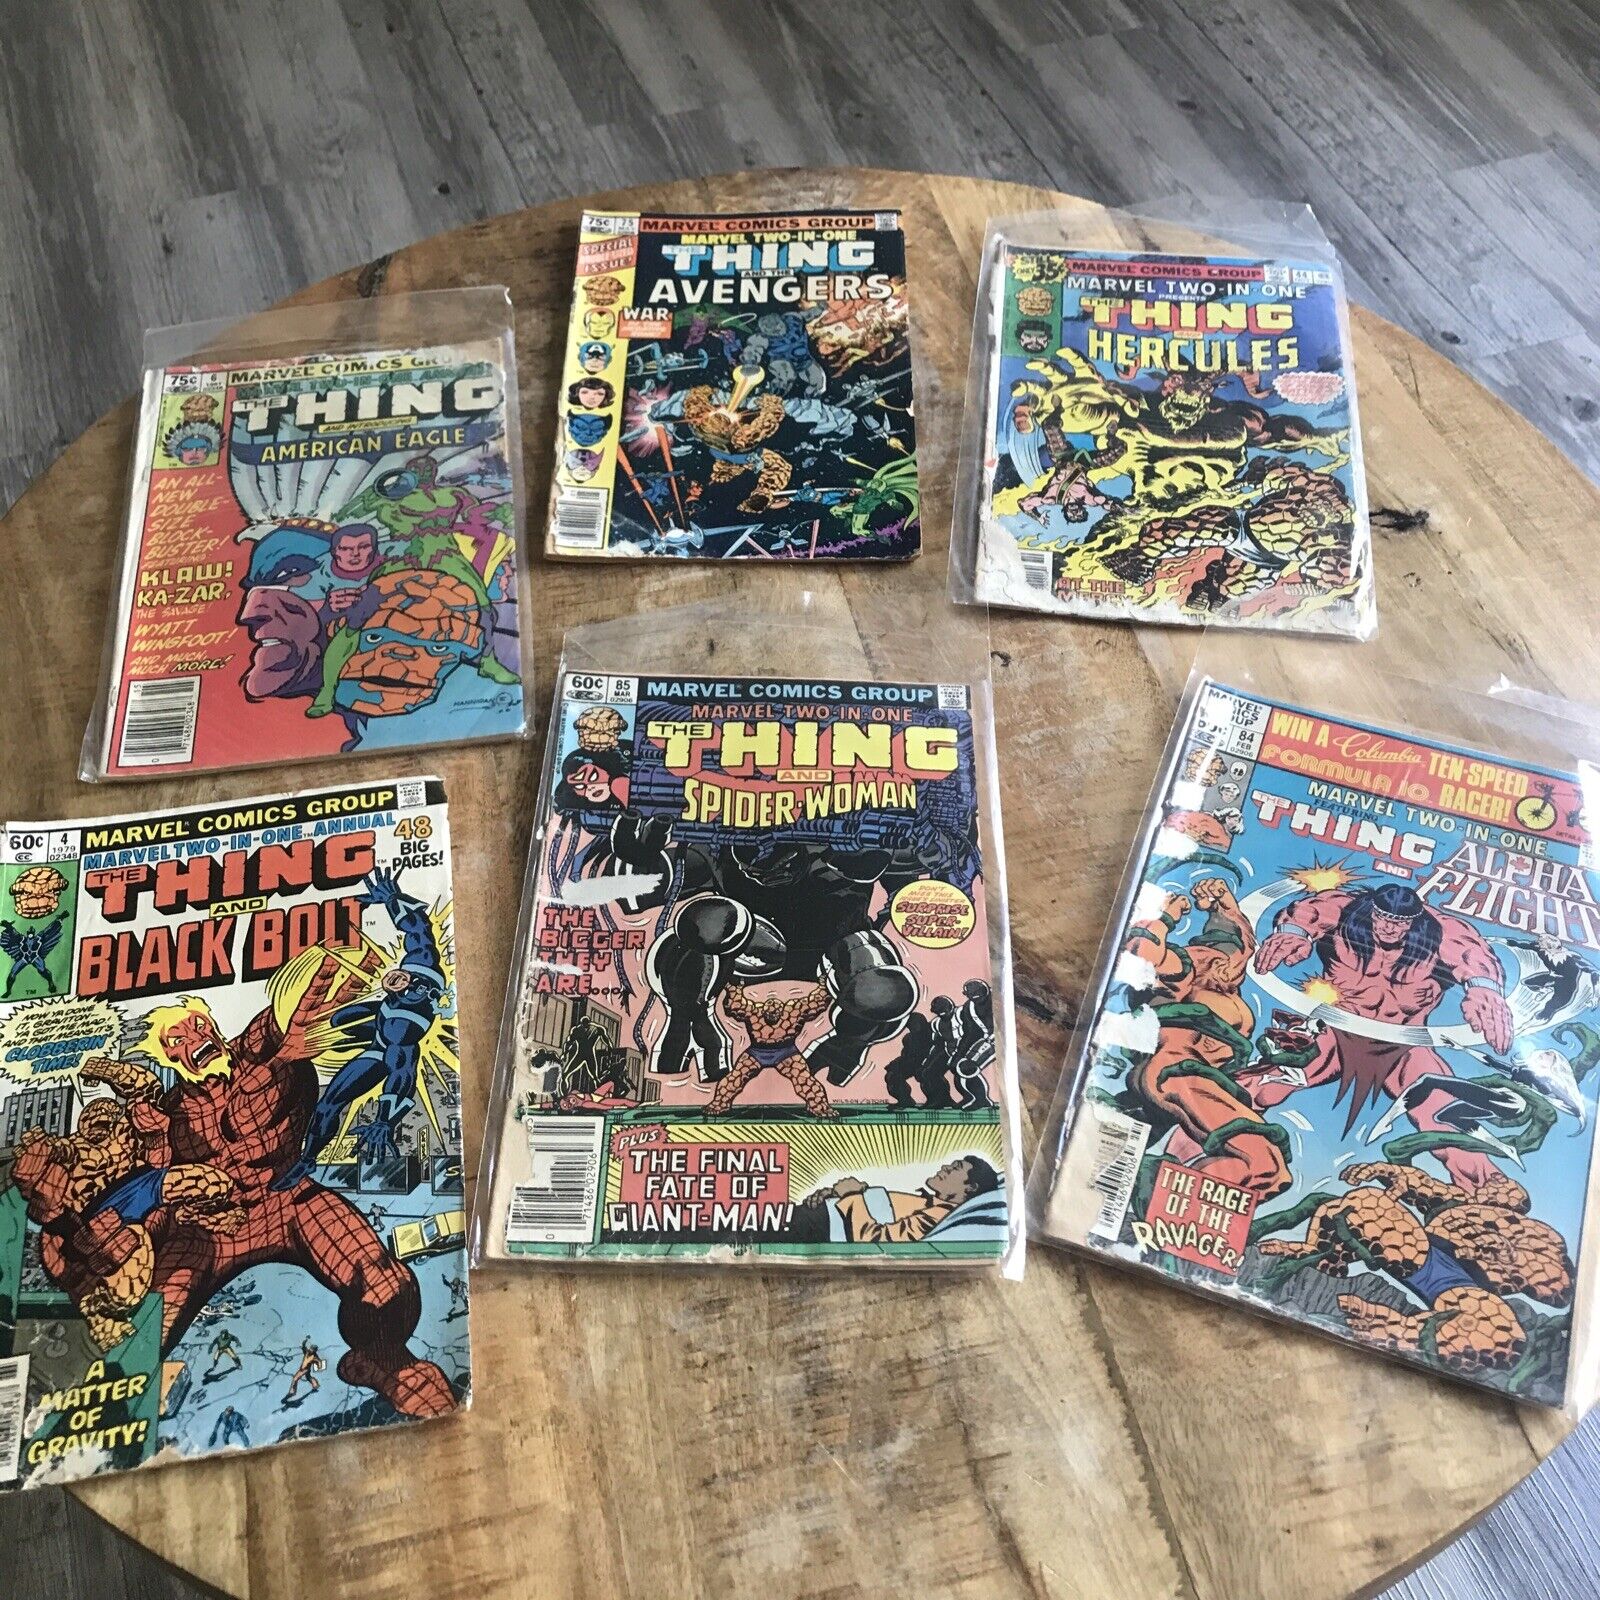 VTG Marvel Comics The Thing Various Other Characters Rare Collectables Lot Of 31